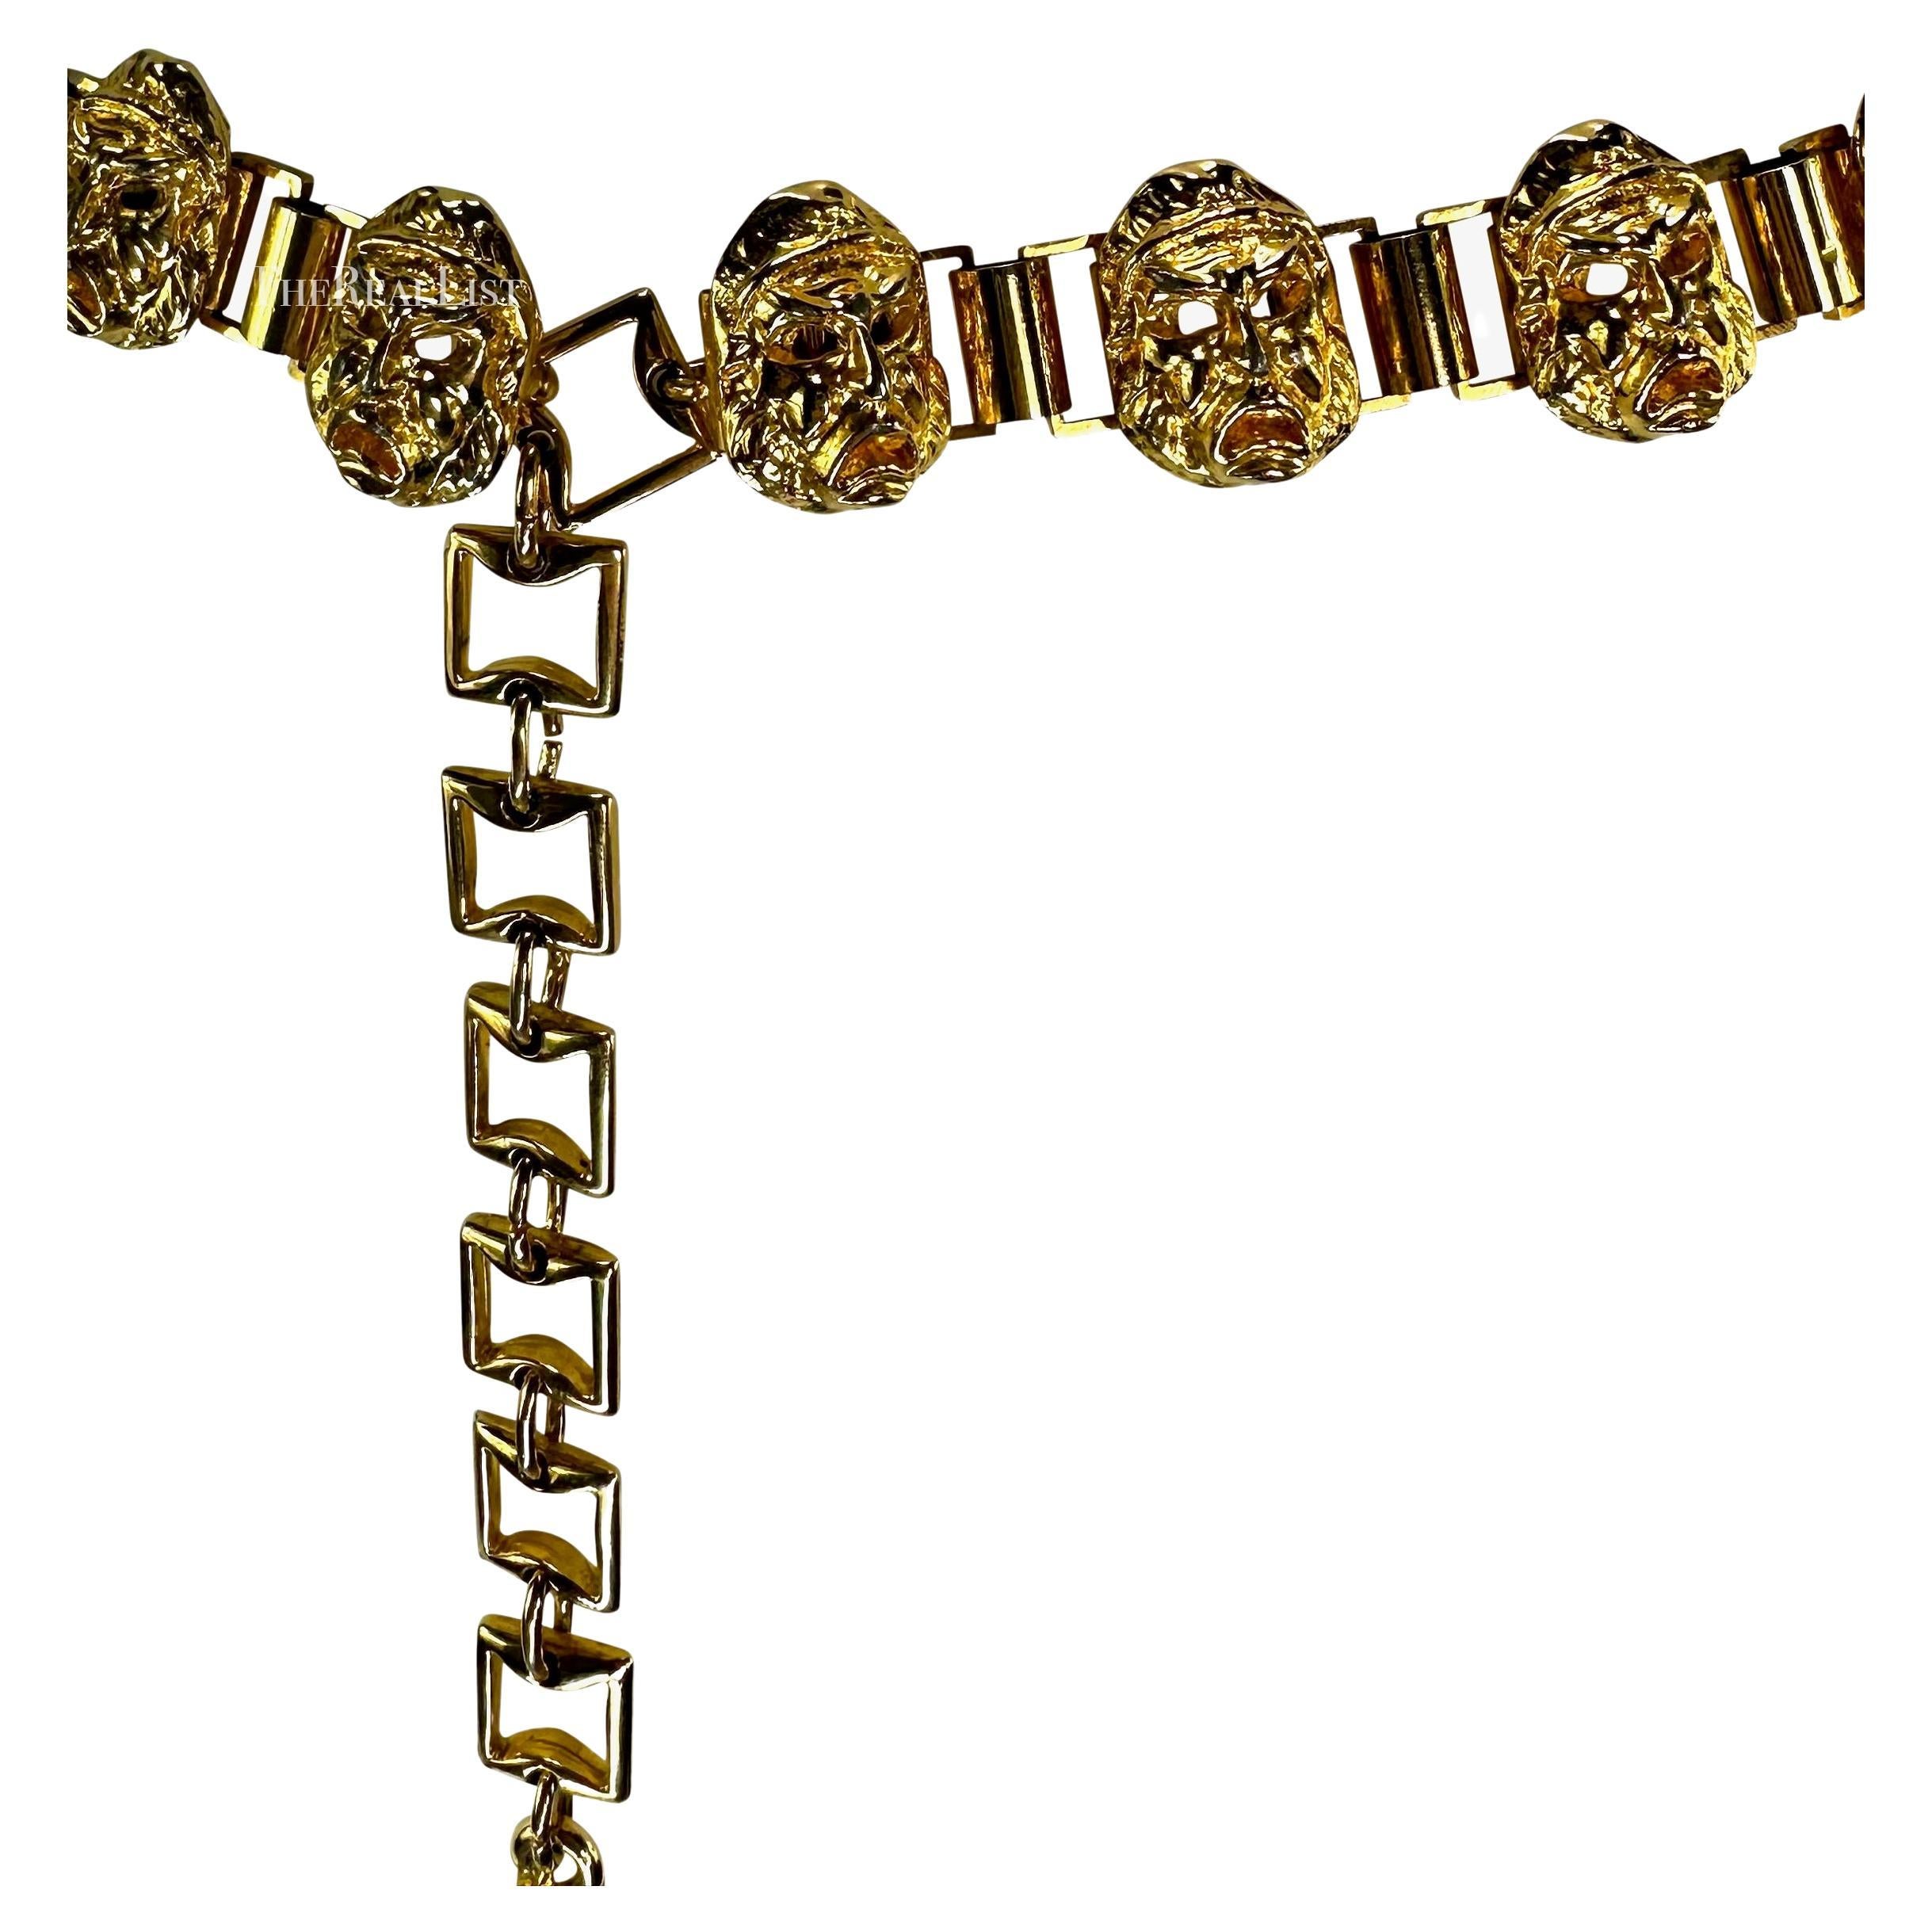 S/S 1992 Gianni Versace Gold Tone Roman Mask Chain Belt  For Sale 2